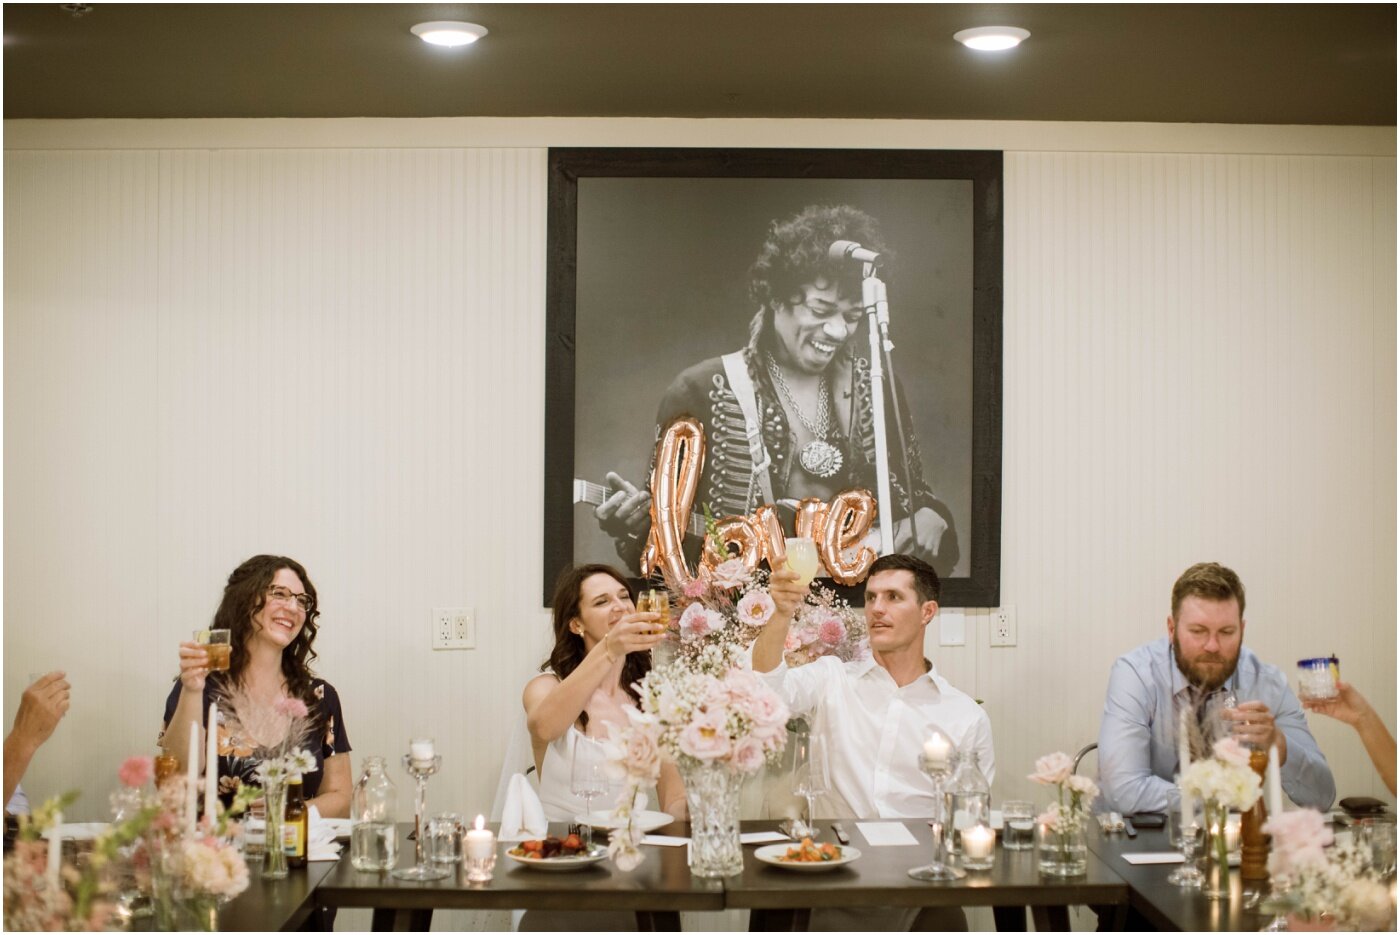 newlyweds enjoying a meal with their wedding guests